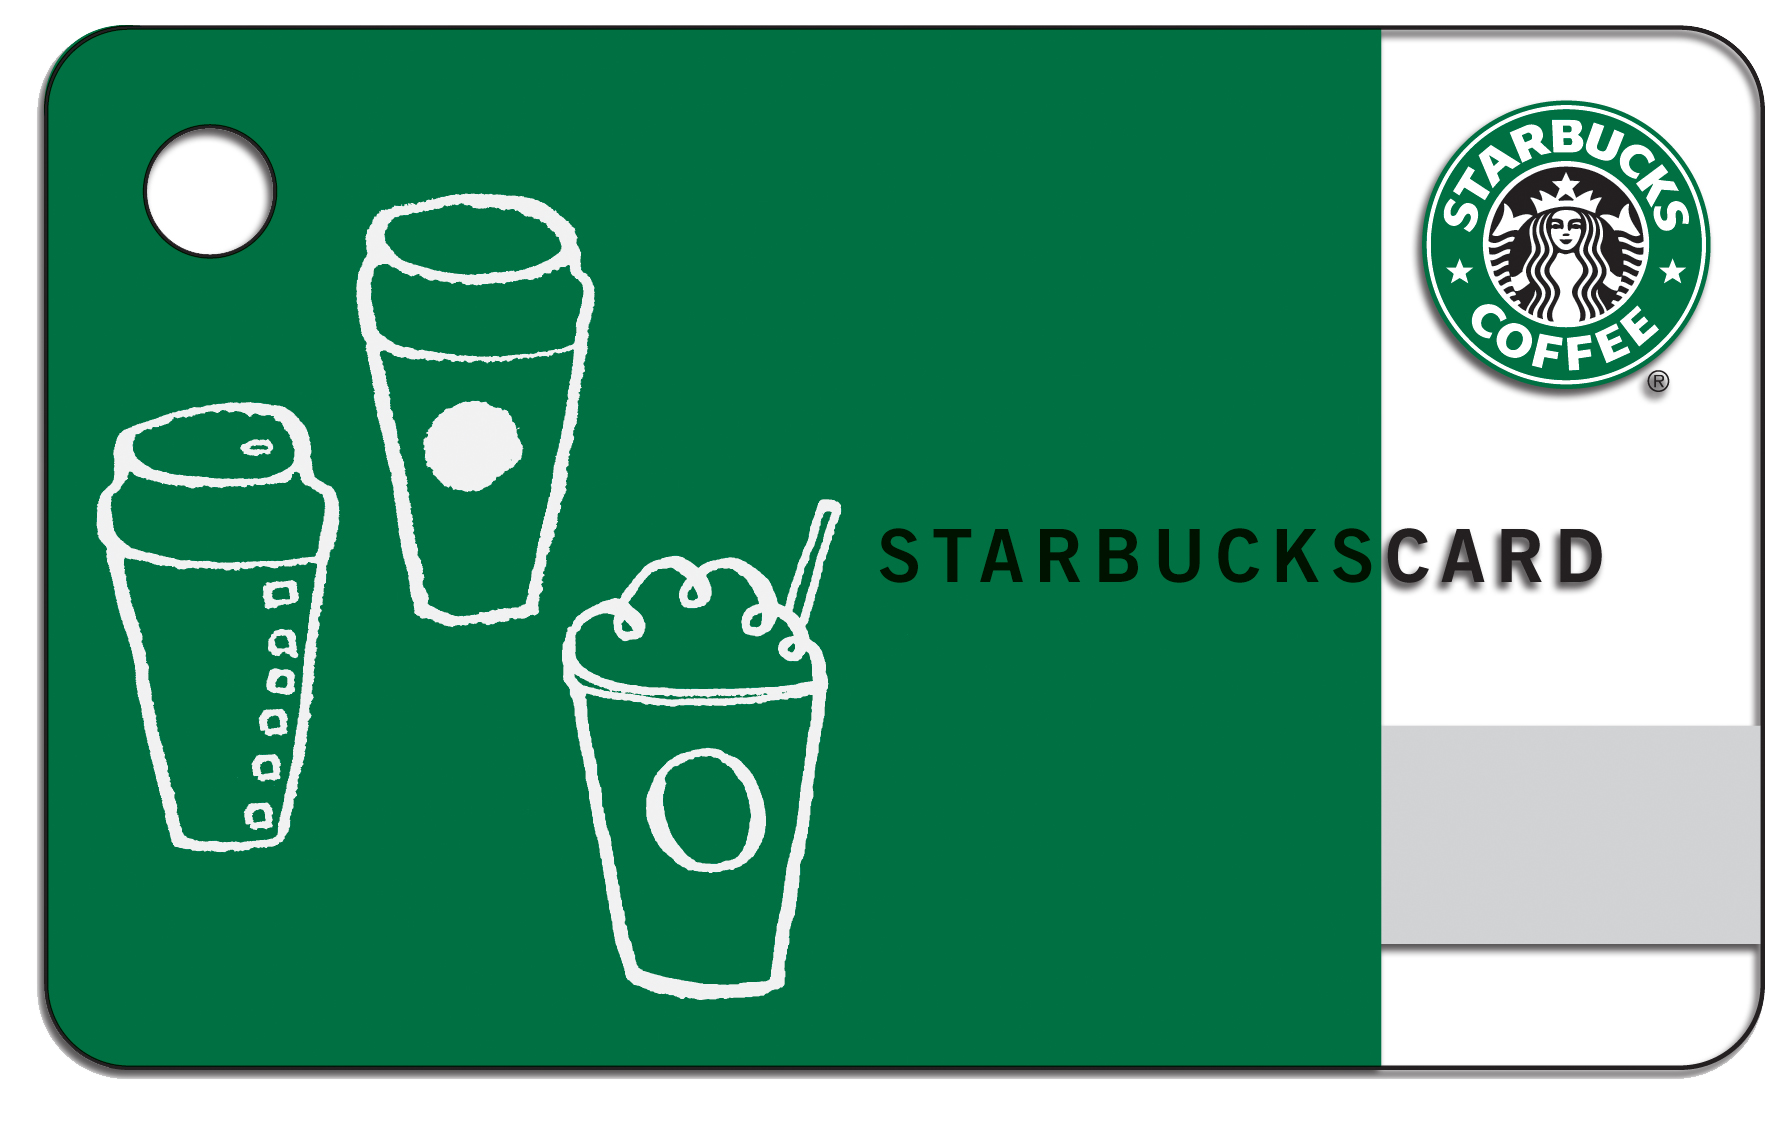 And Gift Discounts Starbucks Allowances Card Voucher PNG Image